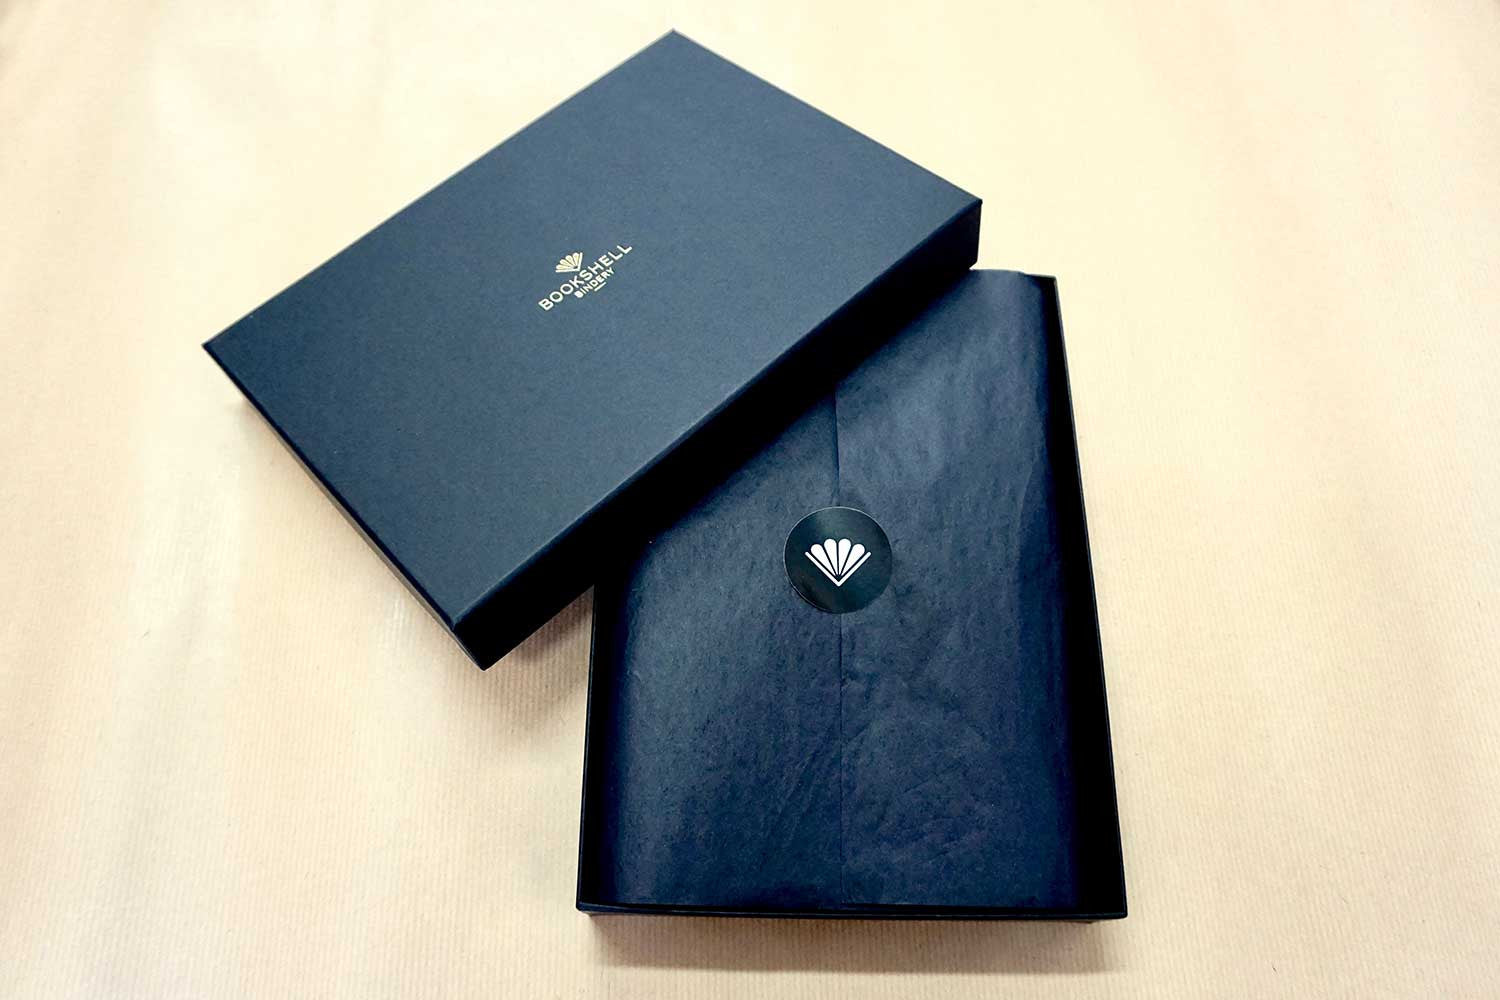 Leather journal ready to gift in beautiful packaging from Bookshell Bindery